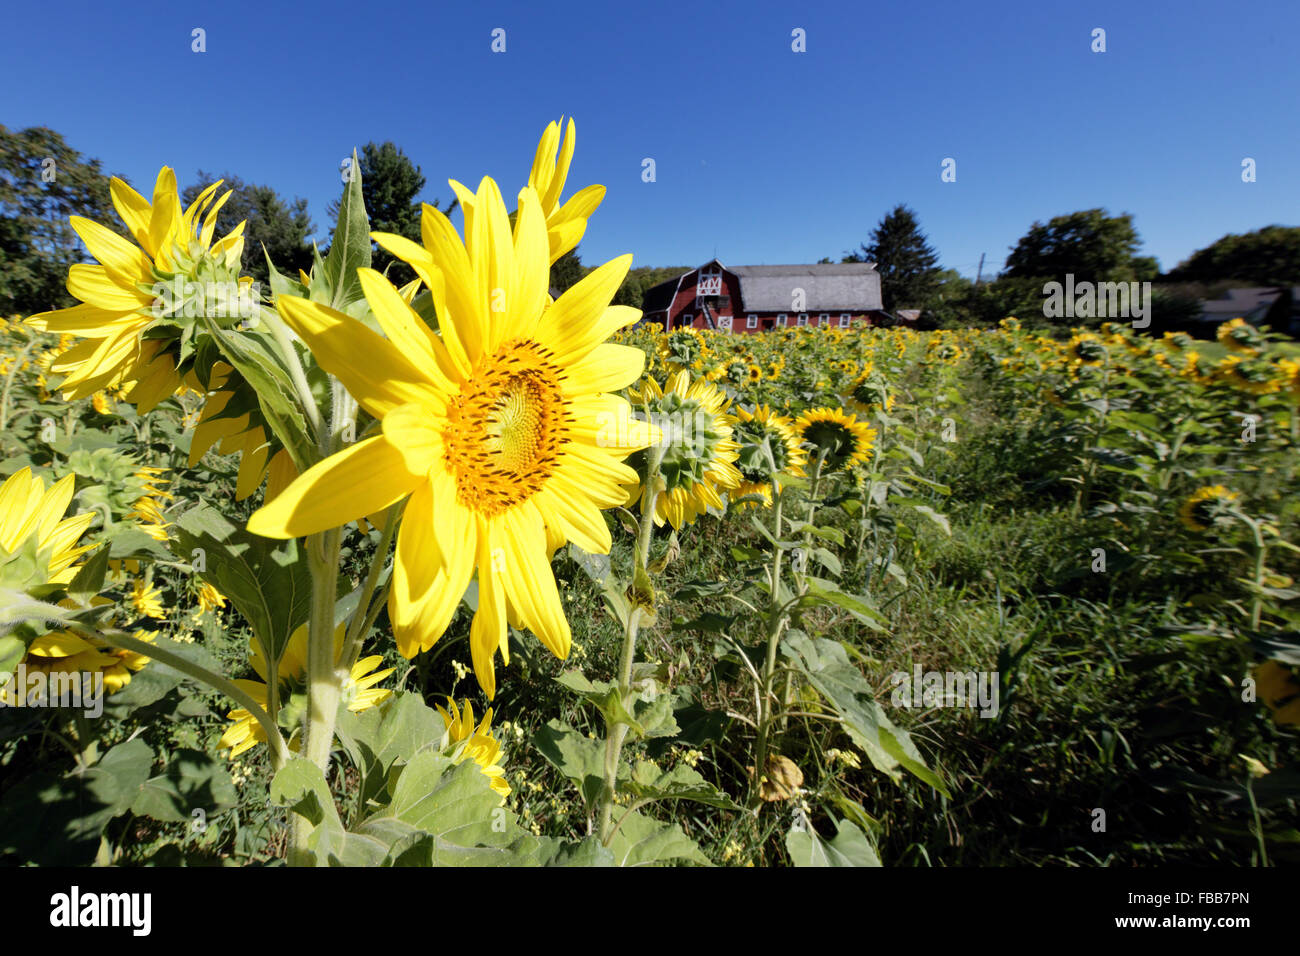 Close Up View of a Sunflower in a Filed with a Red Barn in The background, Sparta, Sussex County, New Jersey Stock Photo